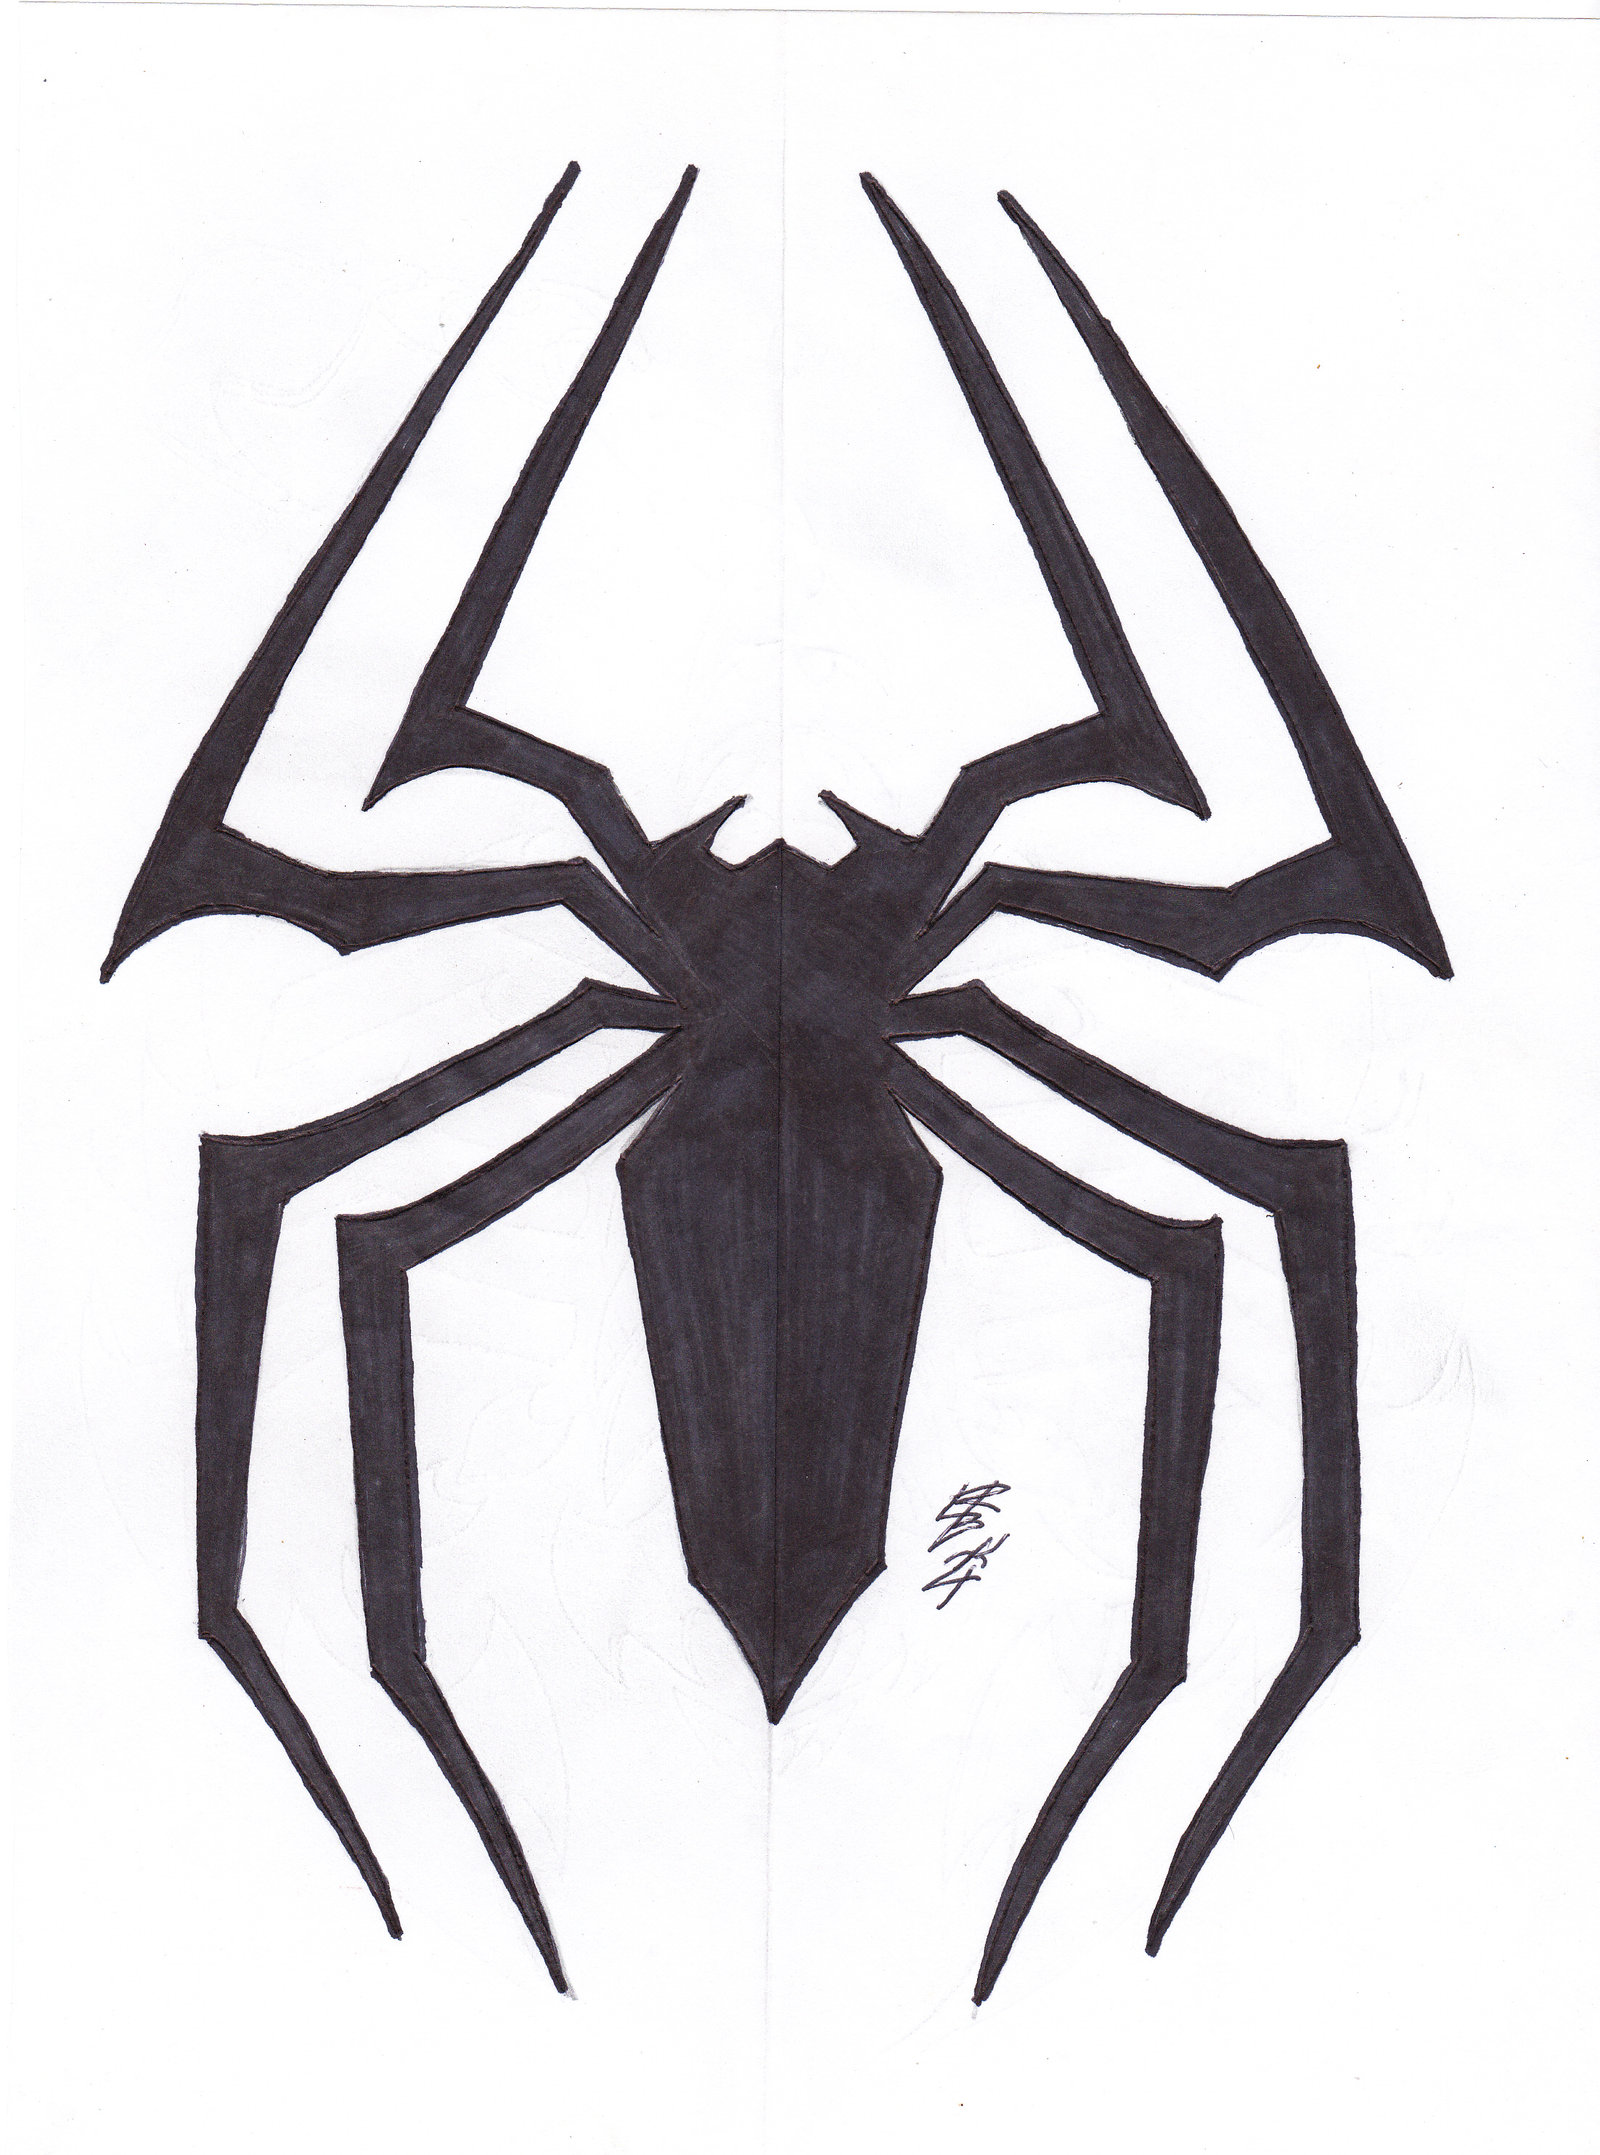 SPIDER-MAN SPIDER SYMBOL by lrayjus21 on Clipart library